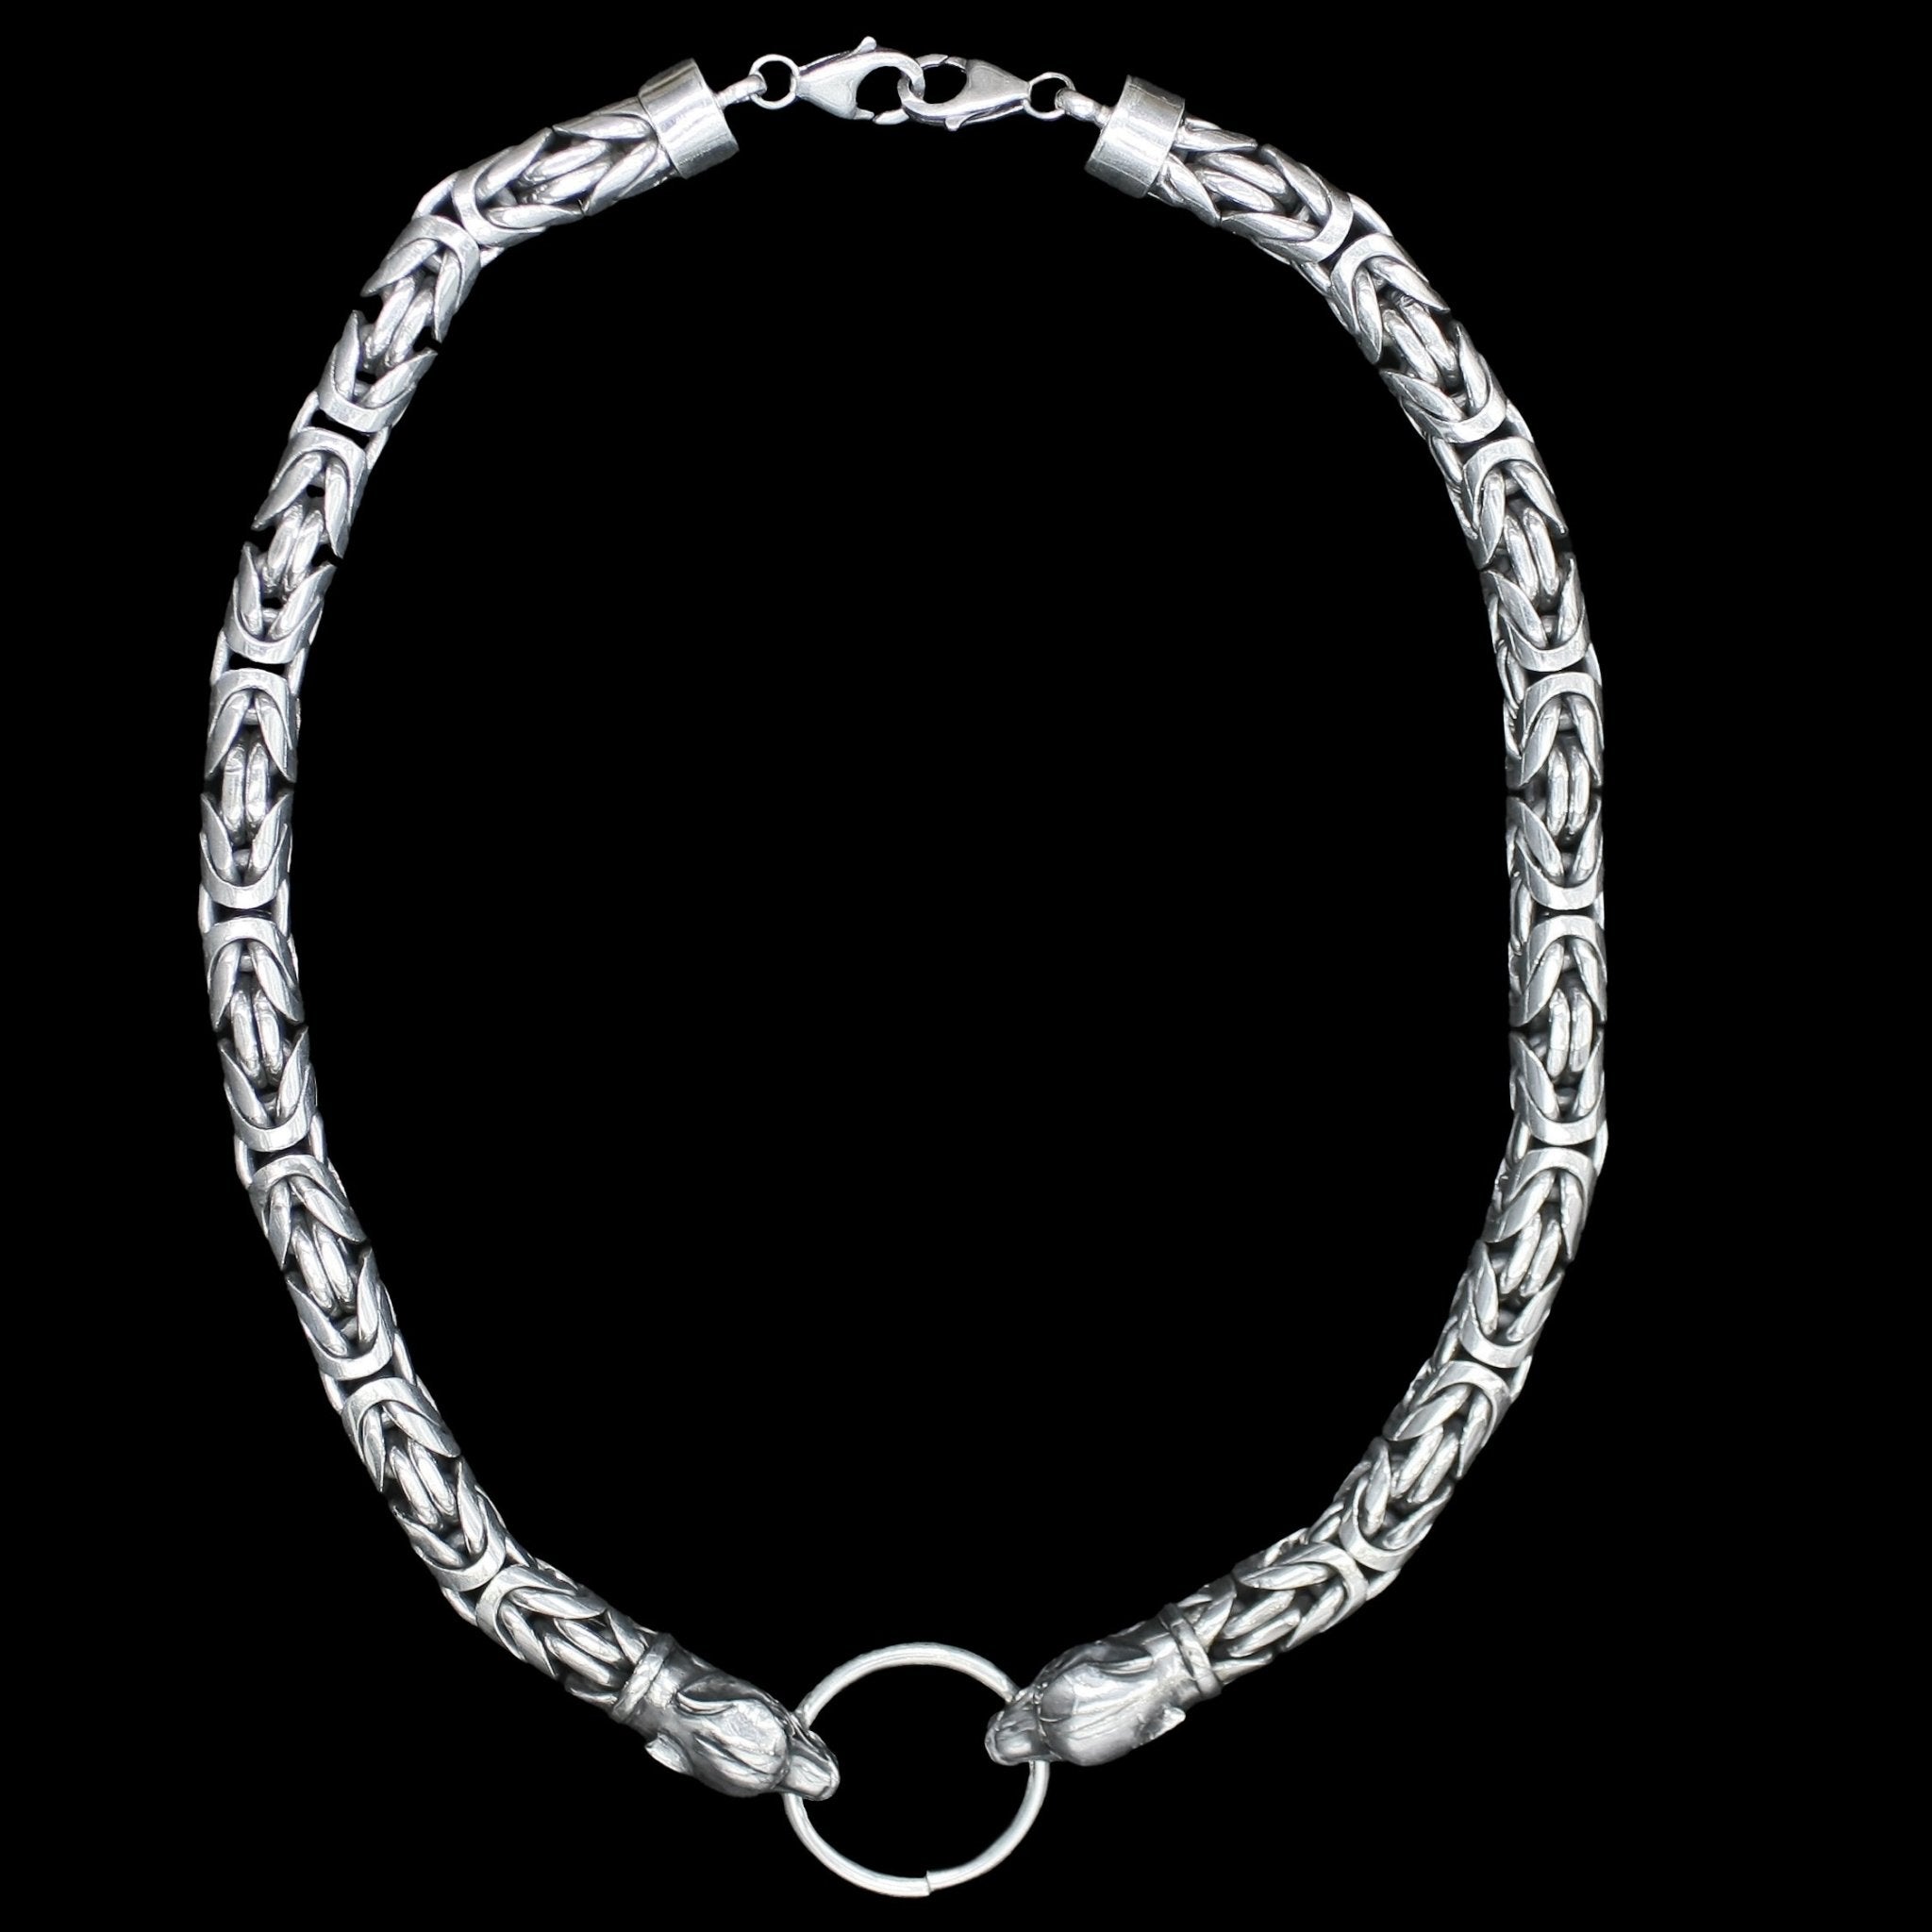 10mm Silver Double King Chain Necklace with ferocious Wolf Heads